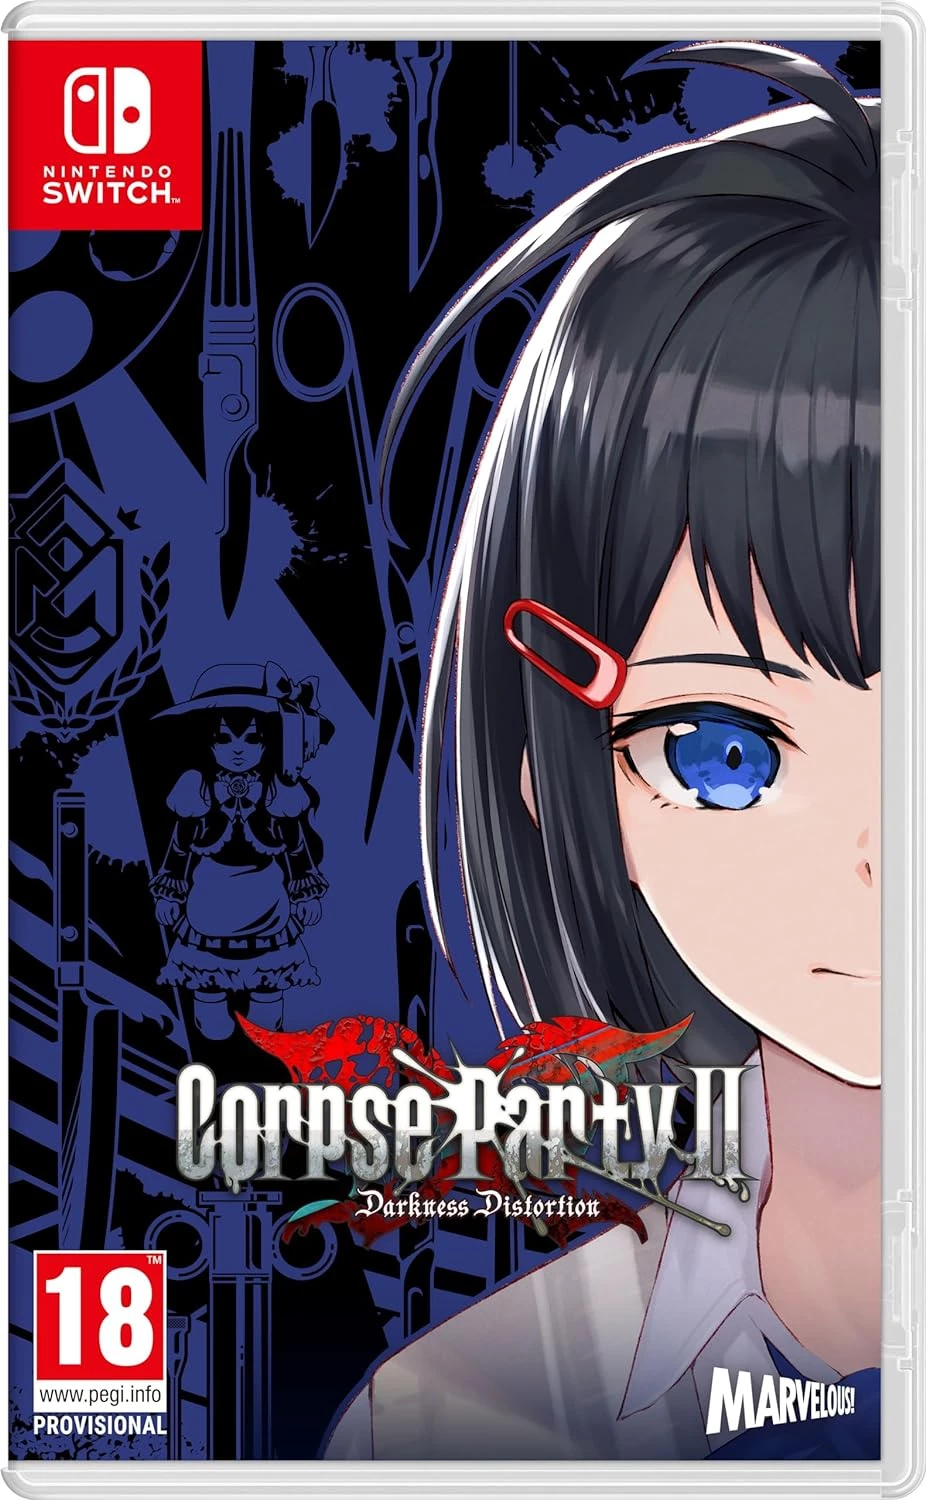 Corpse Party 2: Darkness Distortion (Switch), Marvelous